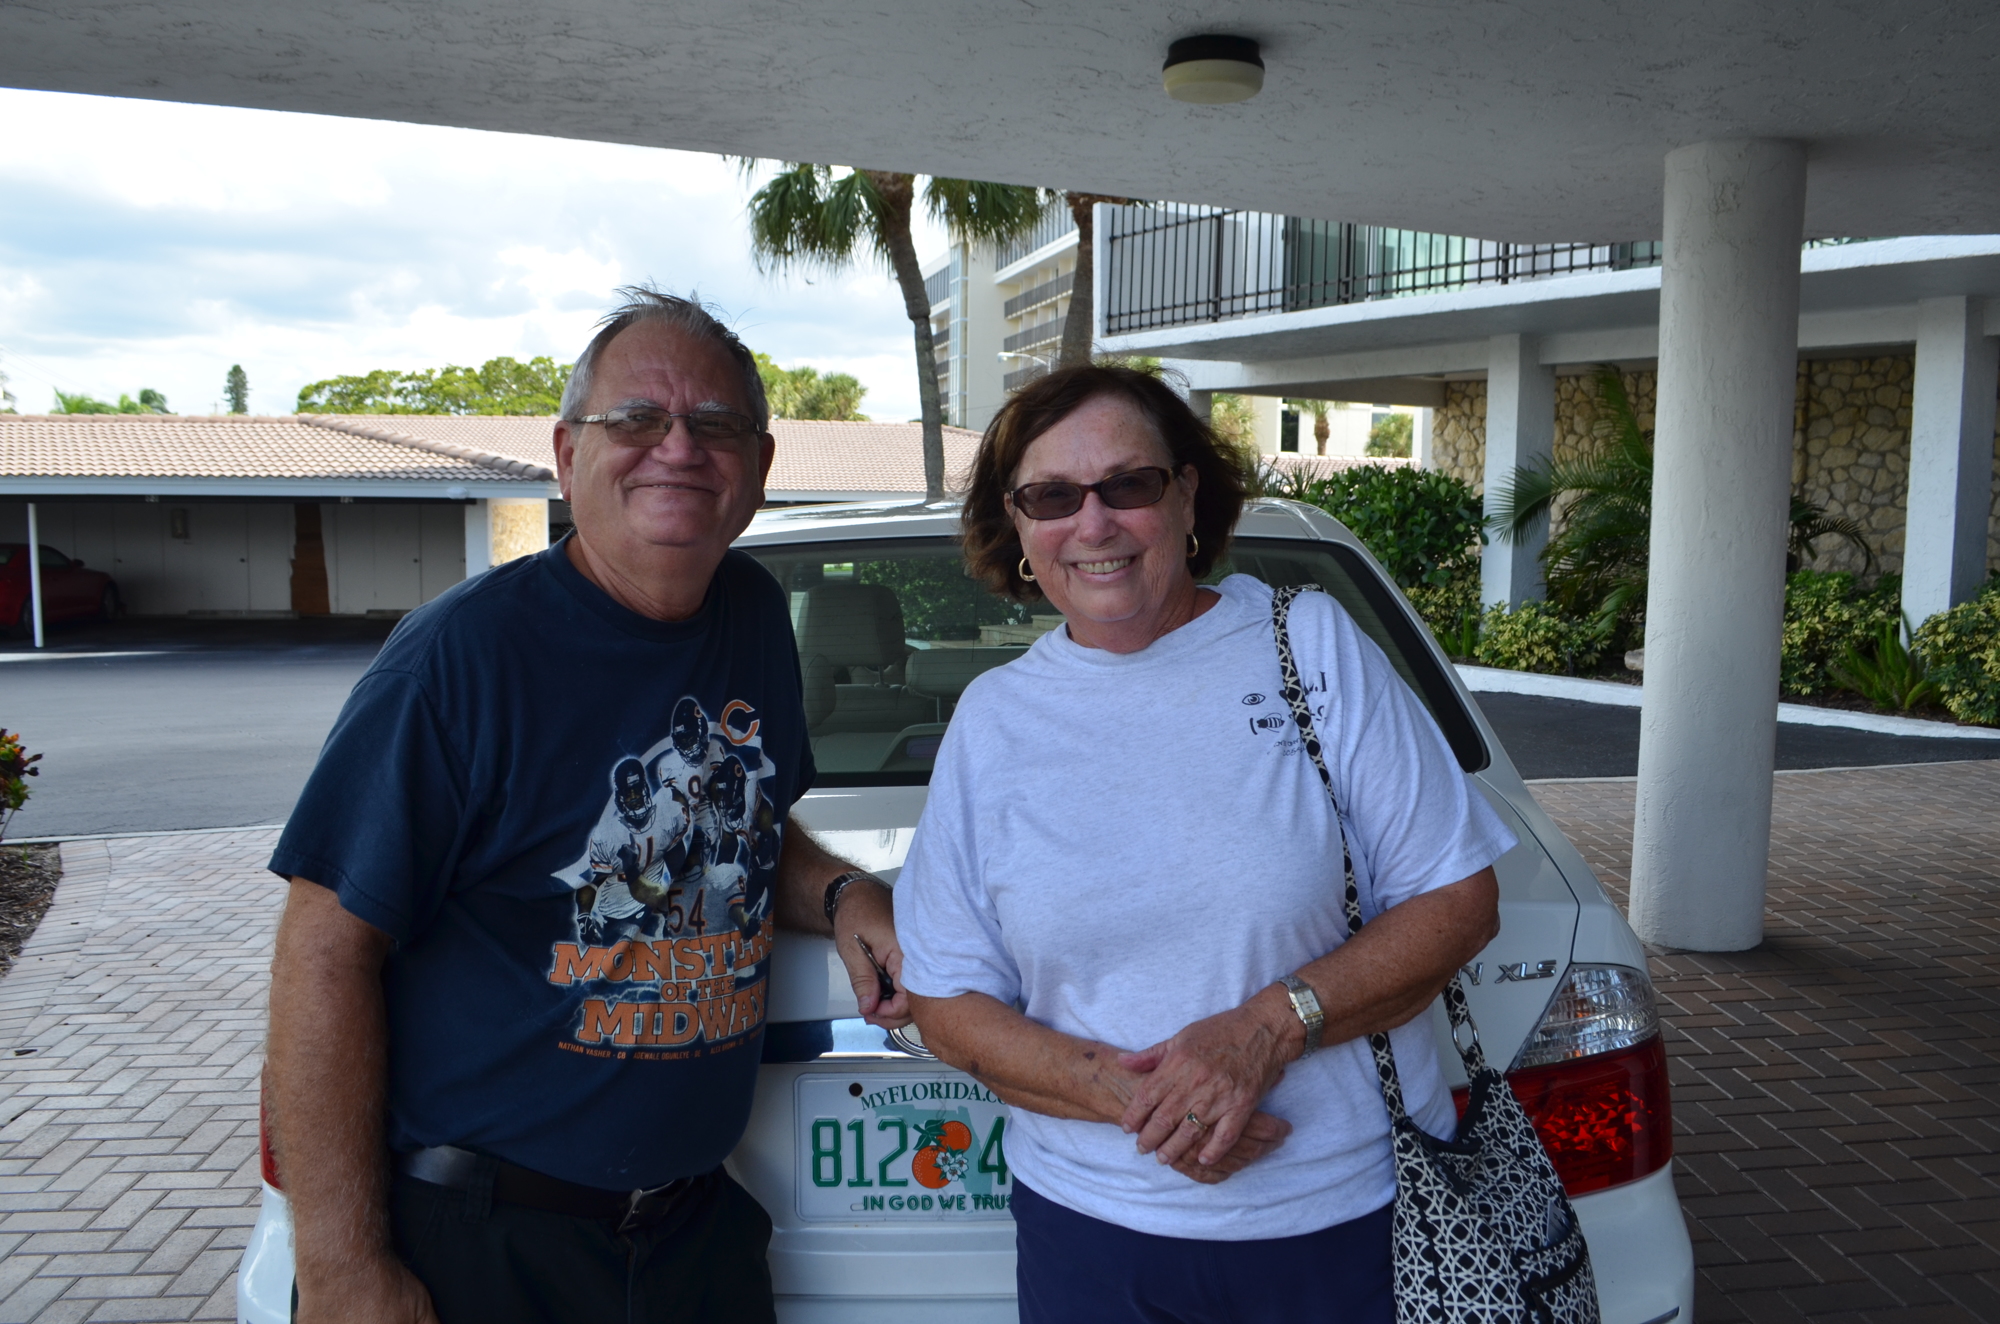 Dale Pitts and Regina Broderick are staying in mainland Sarasota after leaving Lido Key.